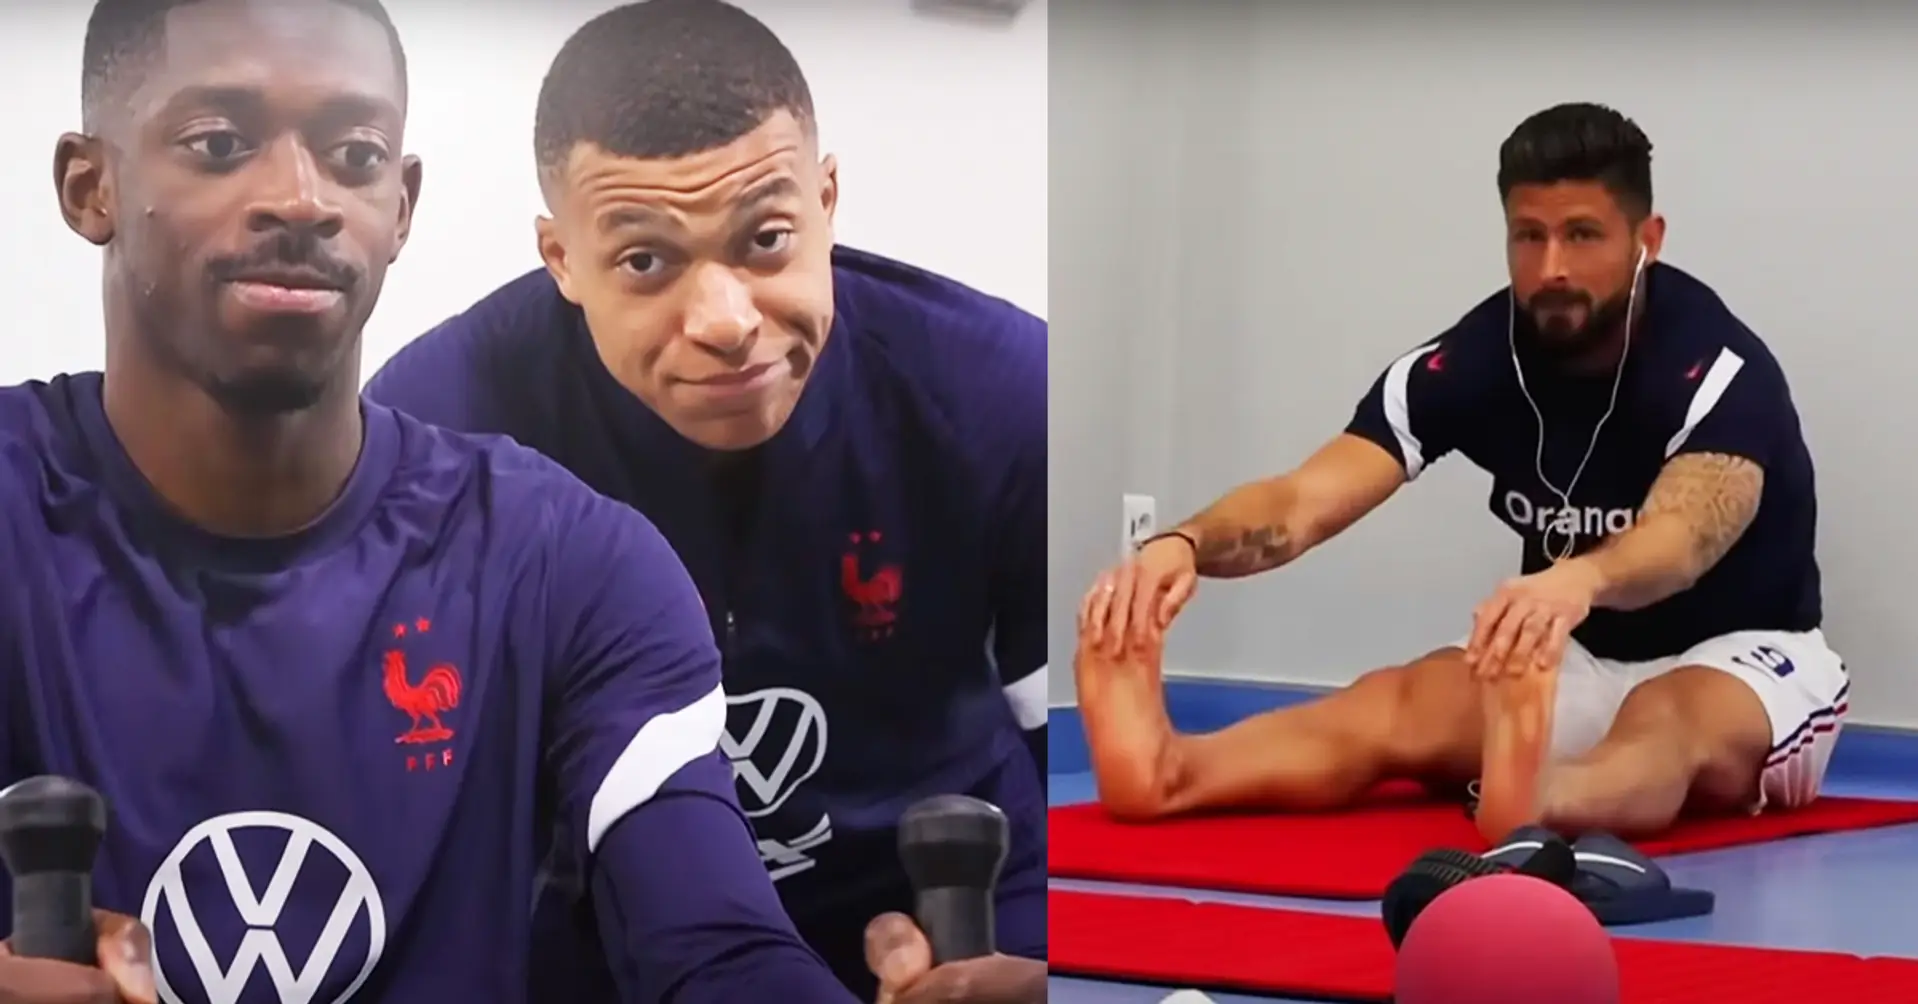 Giroud 'explained himself to Mbappe' and hugged him after training. But Kylian is still unhappy